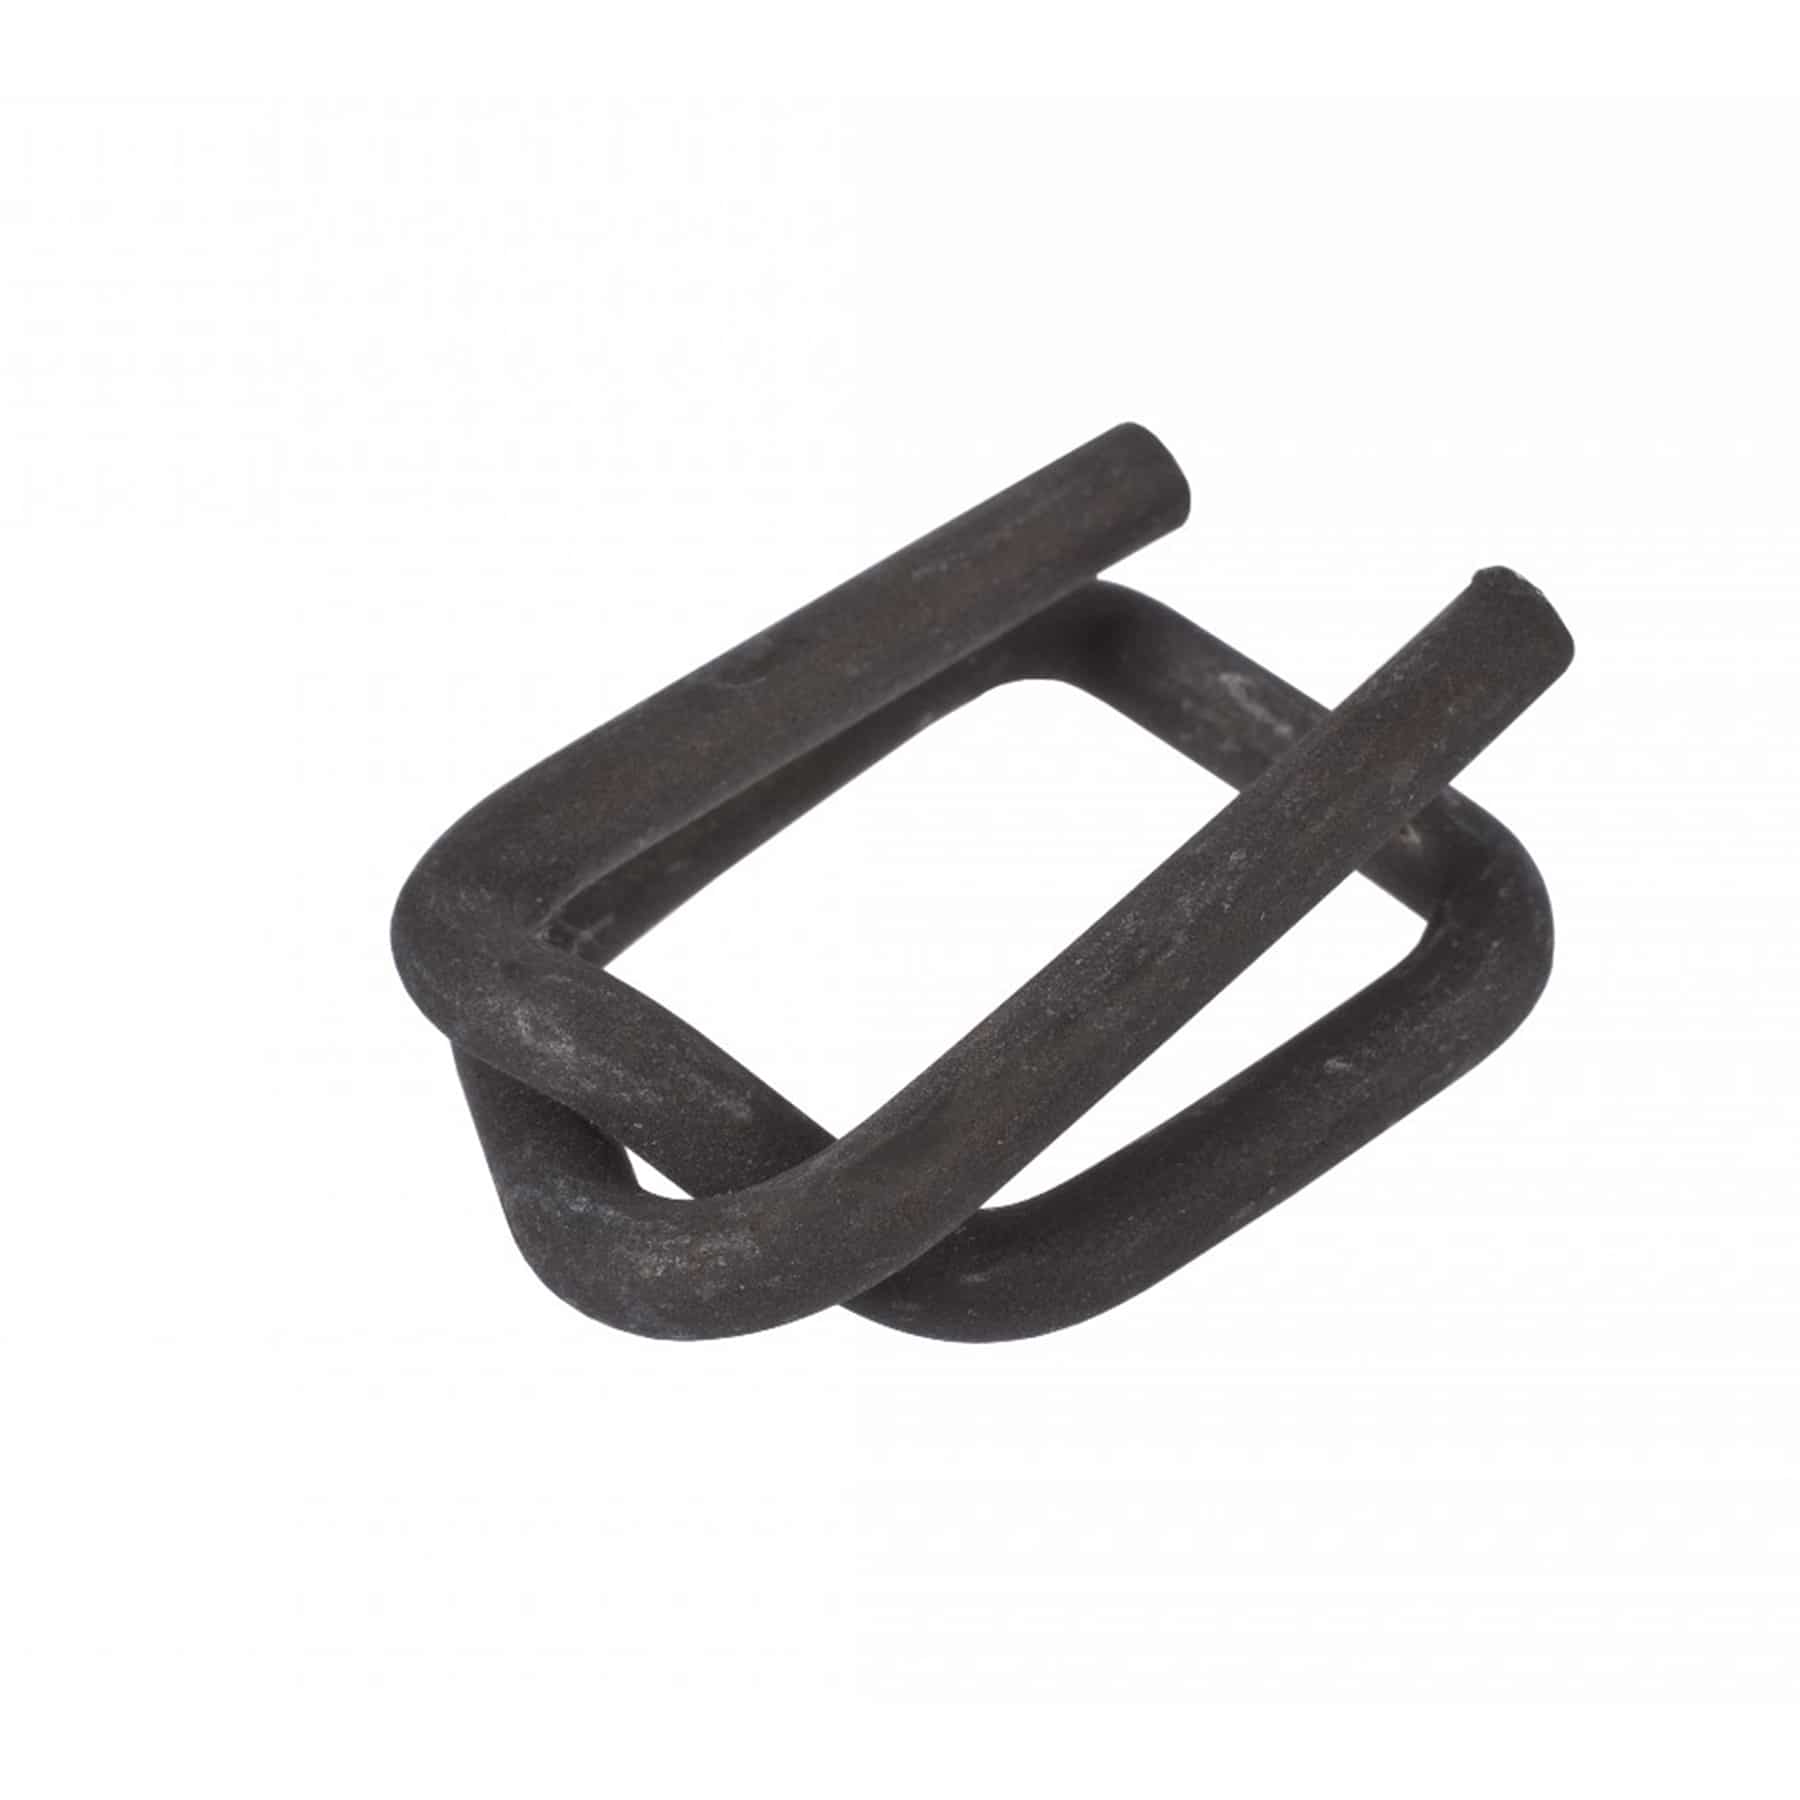 Phosphated Buckles for Corded Strapping